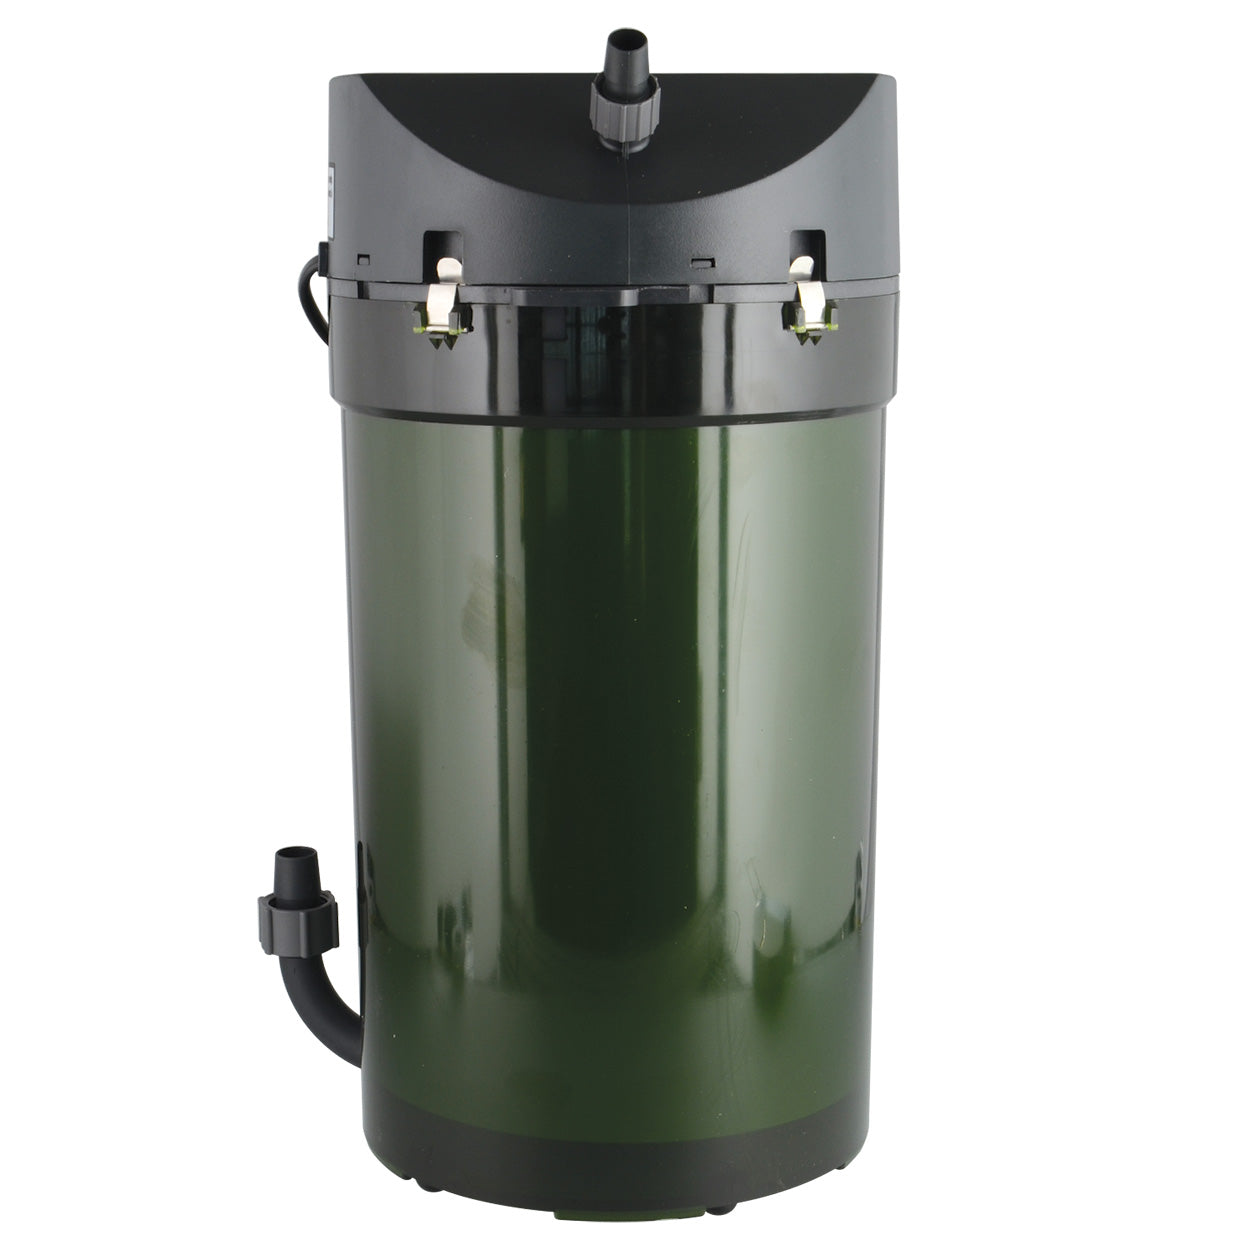 Eheim Classic Canister Filter with Media - 600 (2217)